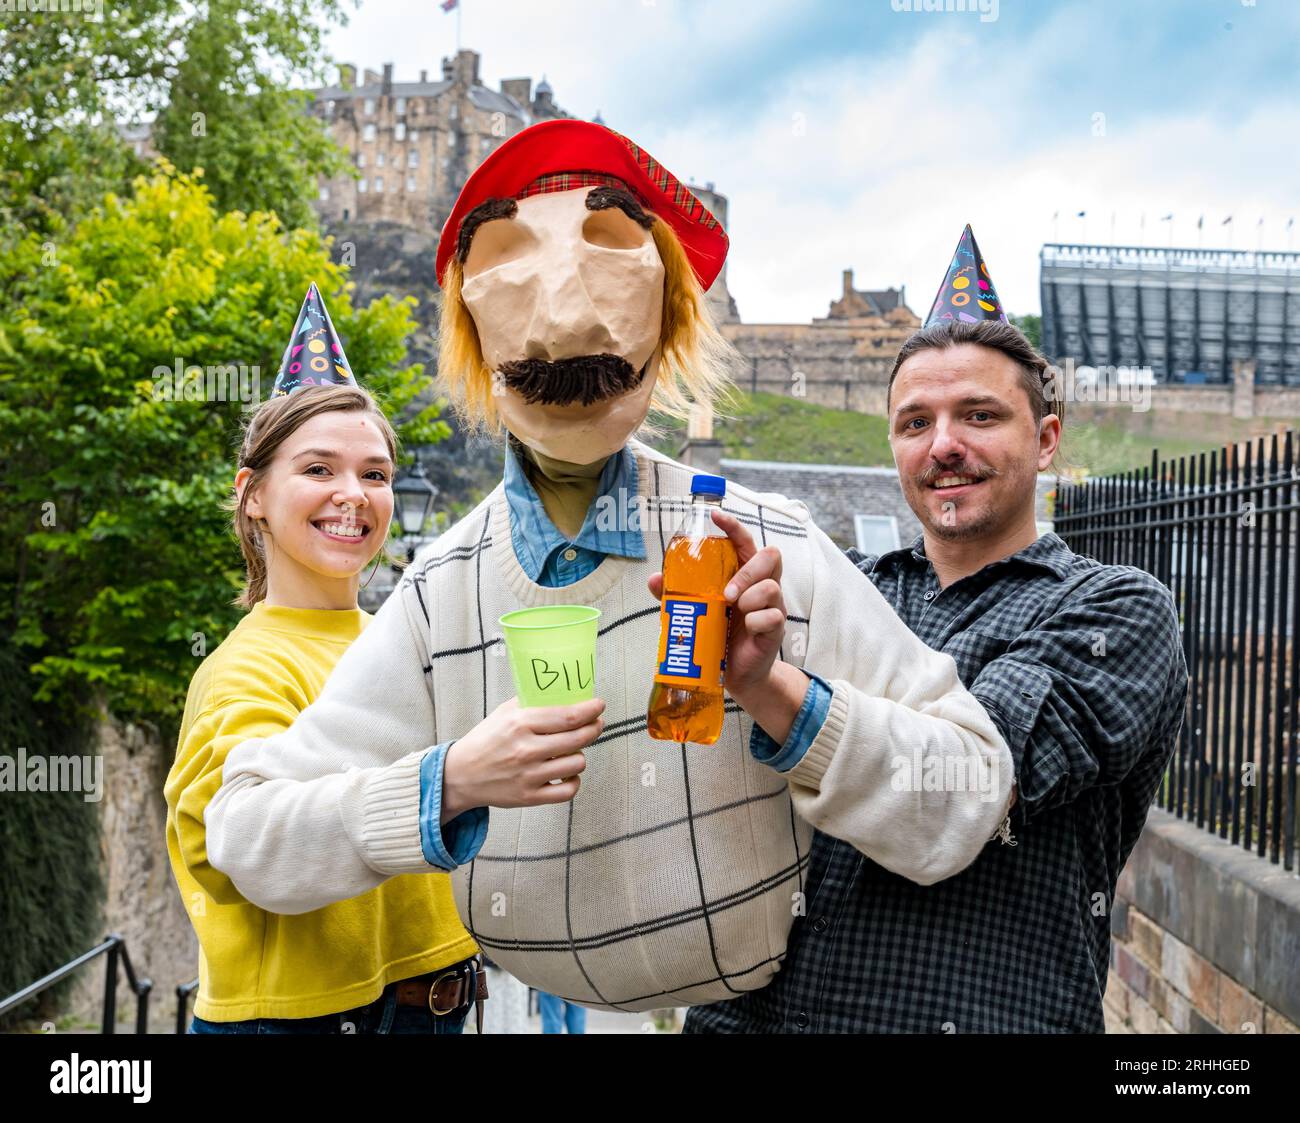 Edinburgh, Scotland, UK, 17 August 2023. Bill’s 44th at Edinburgh Festival Fringe: Bill embraces all things Scottish, wearing a See You Jimmy Tam O’Shanter hat, drinking Irn Bru with Edinburgh castle in the background seen from the iconic Vennel. This puppet show is by New York puppeteers Dorothy James and Andy Manjuck. Credit: Sally Anderson/Alamy Live News Stock Photo